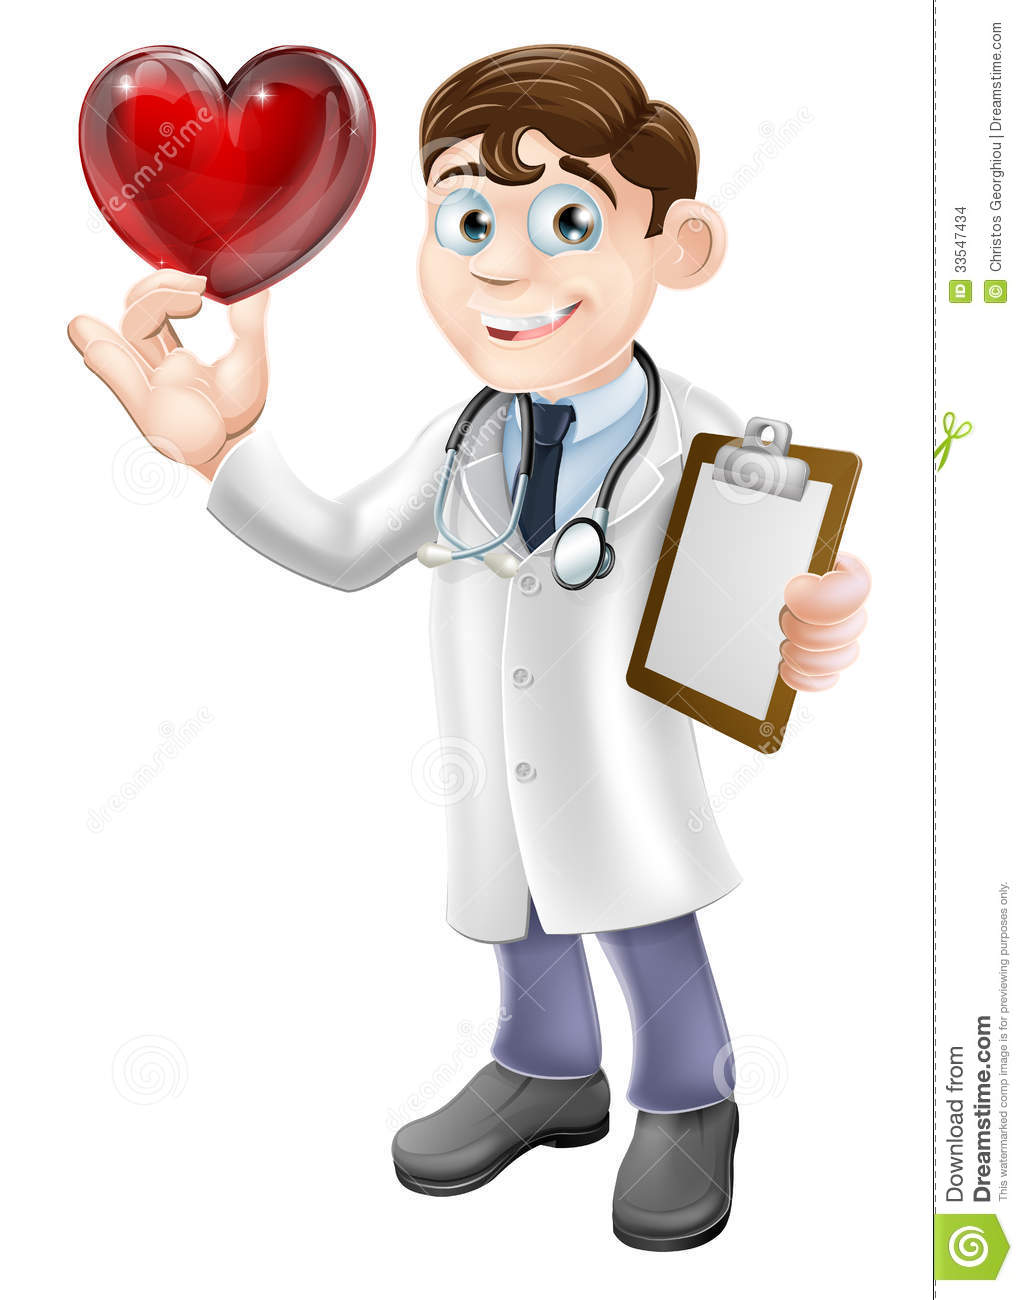 Cartoon Illustration Of A Young Doctor Holding A Heart Shaped Symbol